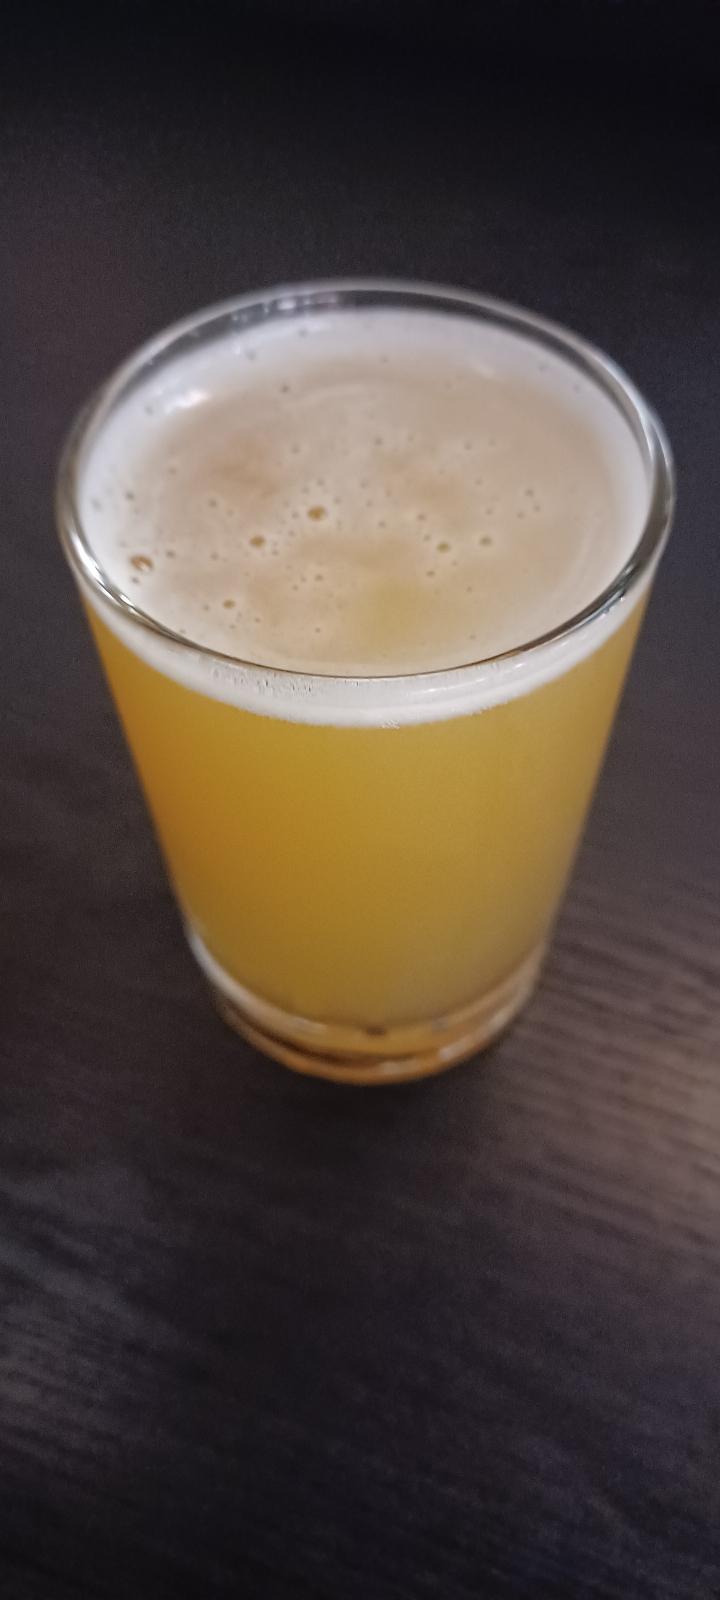 87 Knots (Collaboration with Moon Raker Brewing)